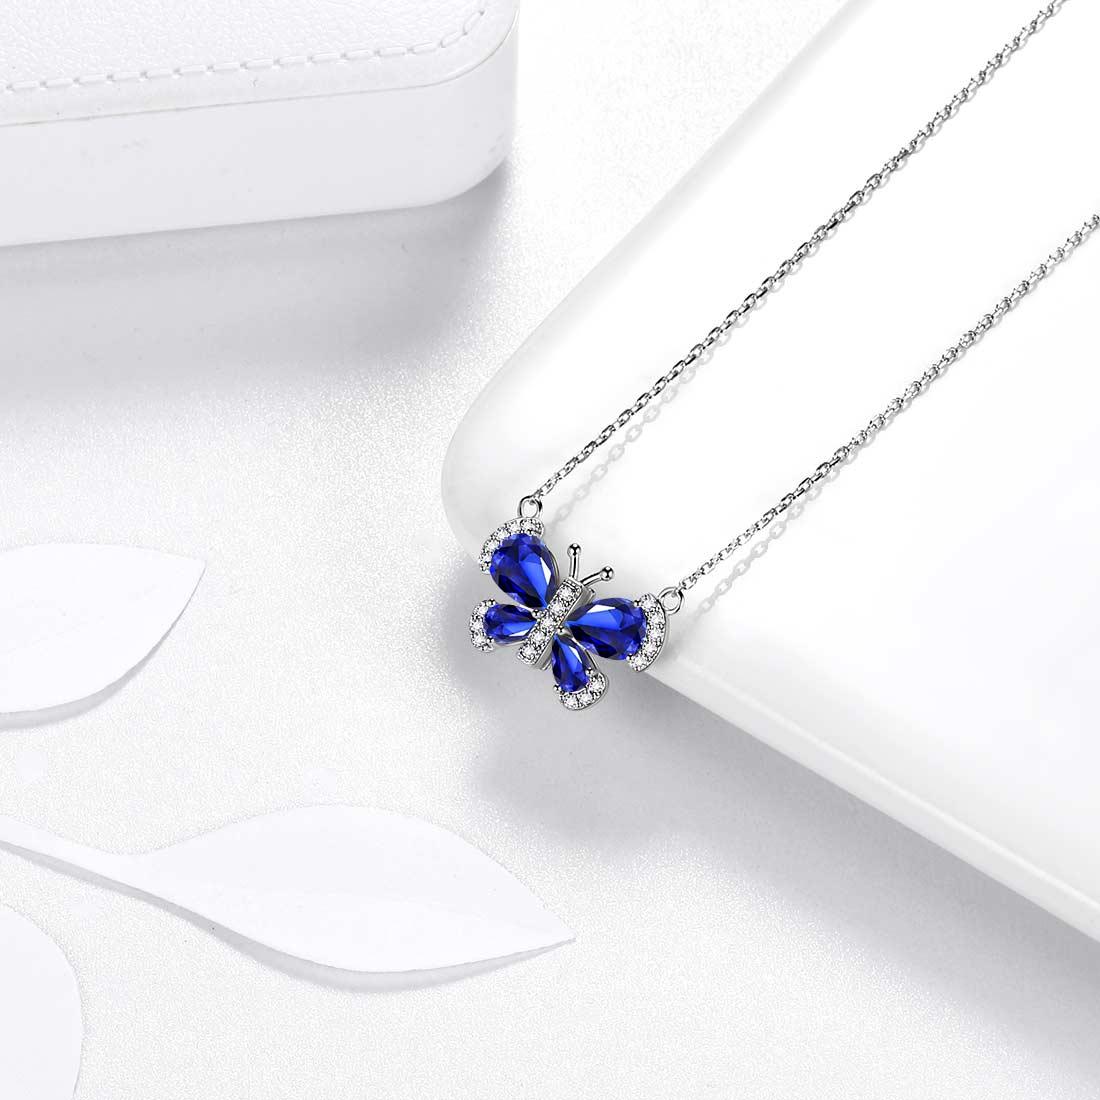 Butterfly Necklace Birthstone September Sapphire Pendant - Necklaces - Aurora Tears